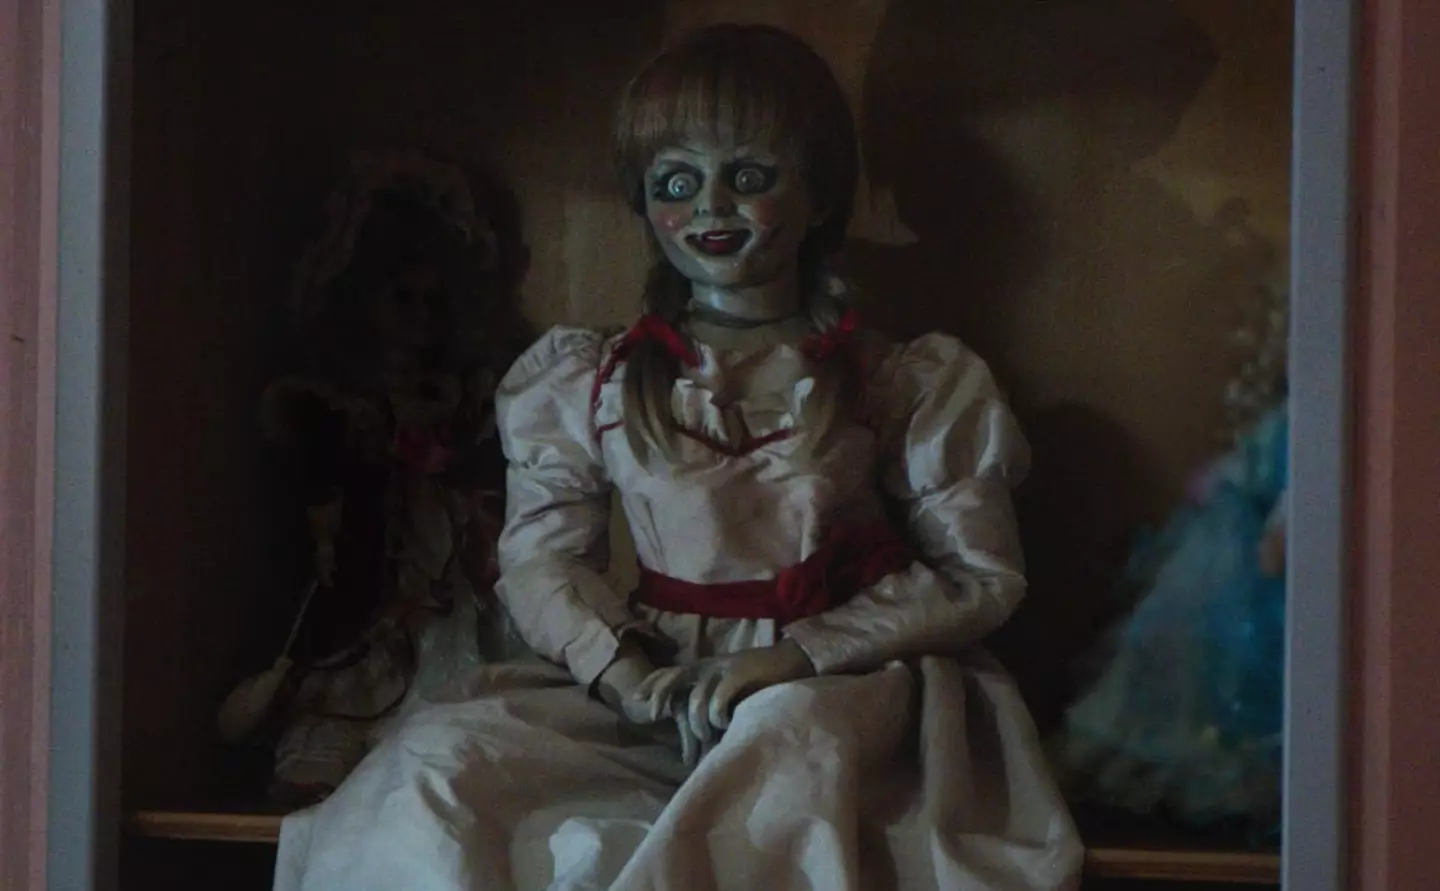 Creepy dolls? It's a no from me.